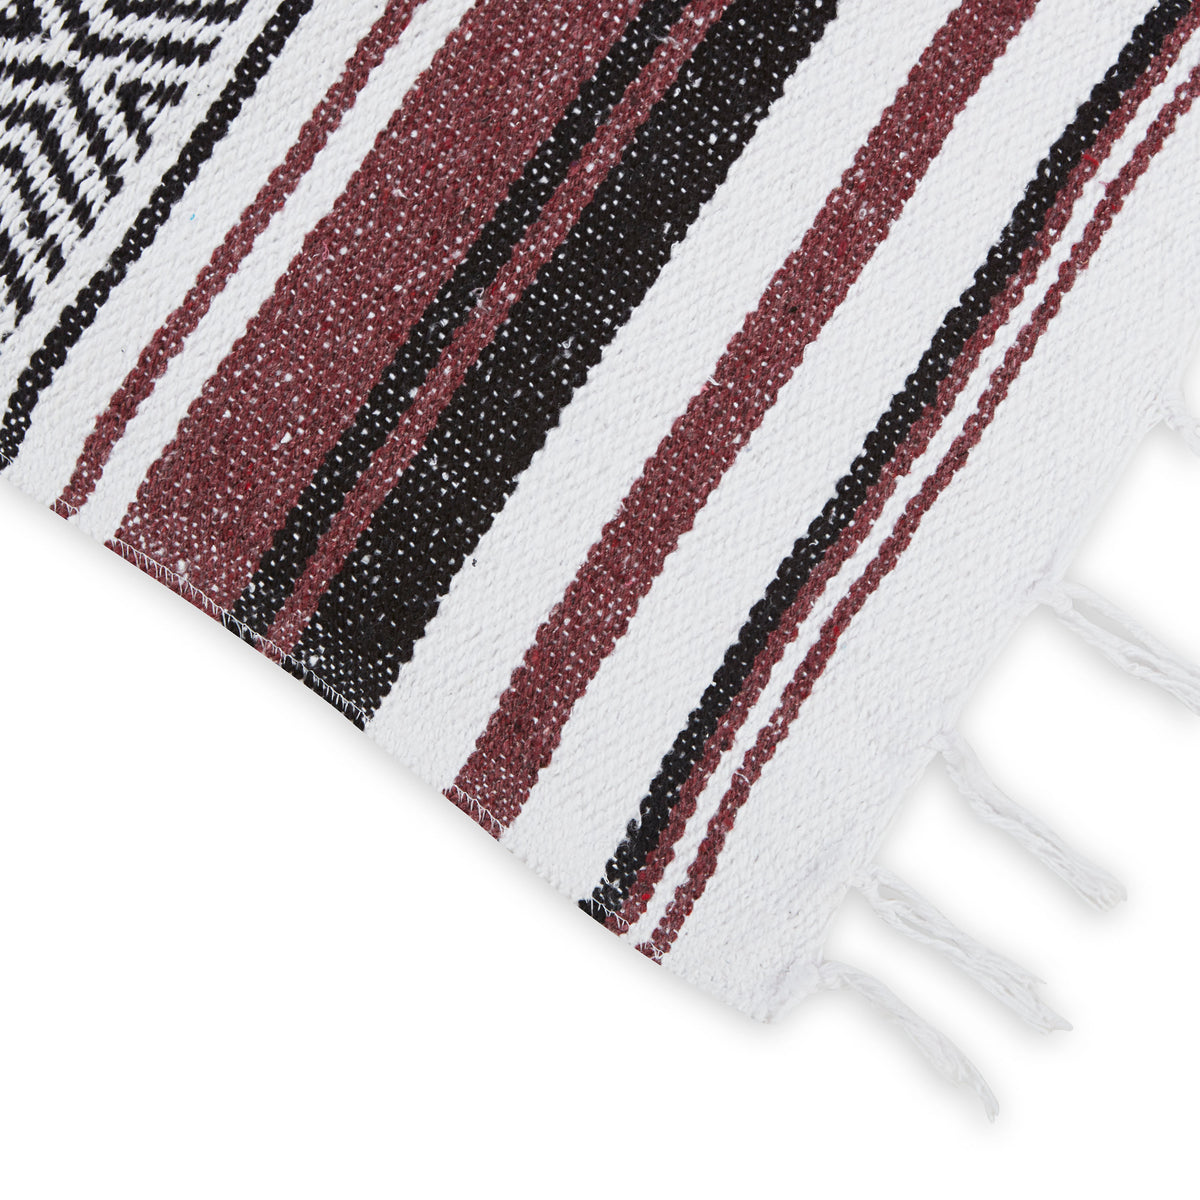 Traditional Mexican Woven Blanket Burgundy/White/Black closeup